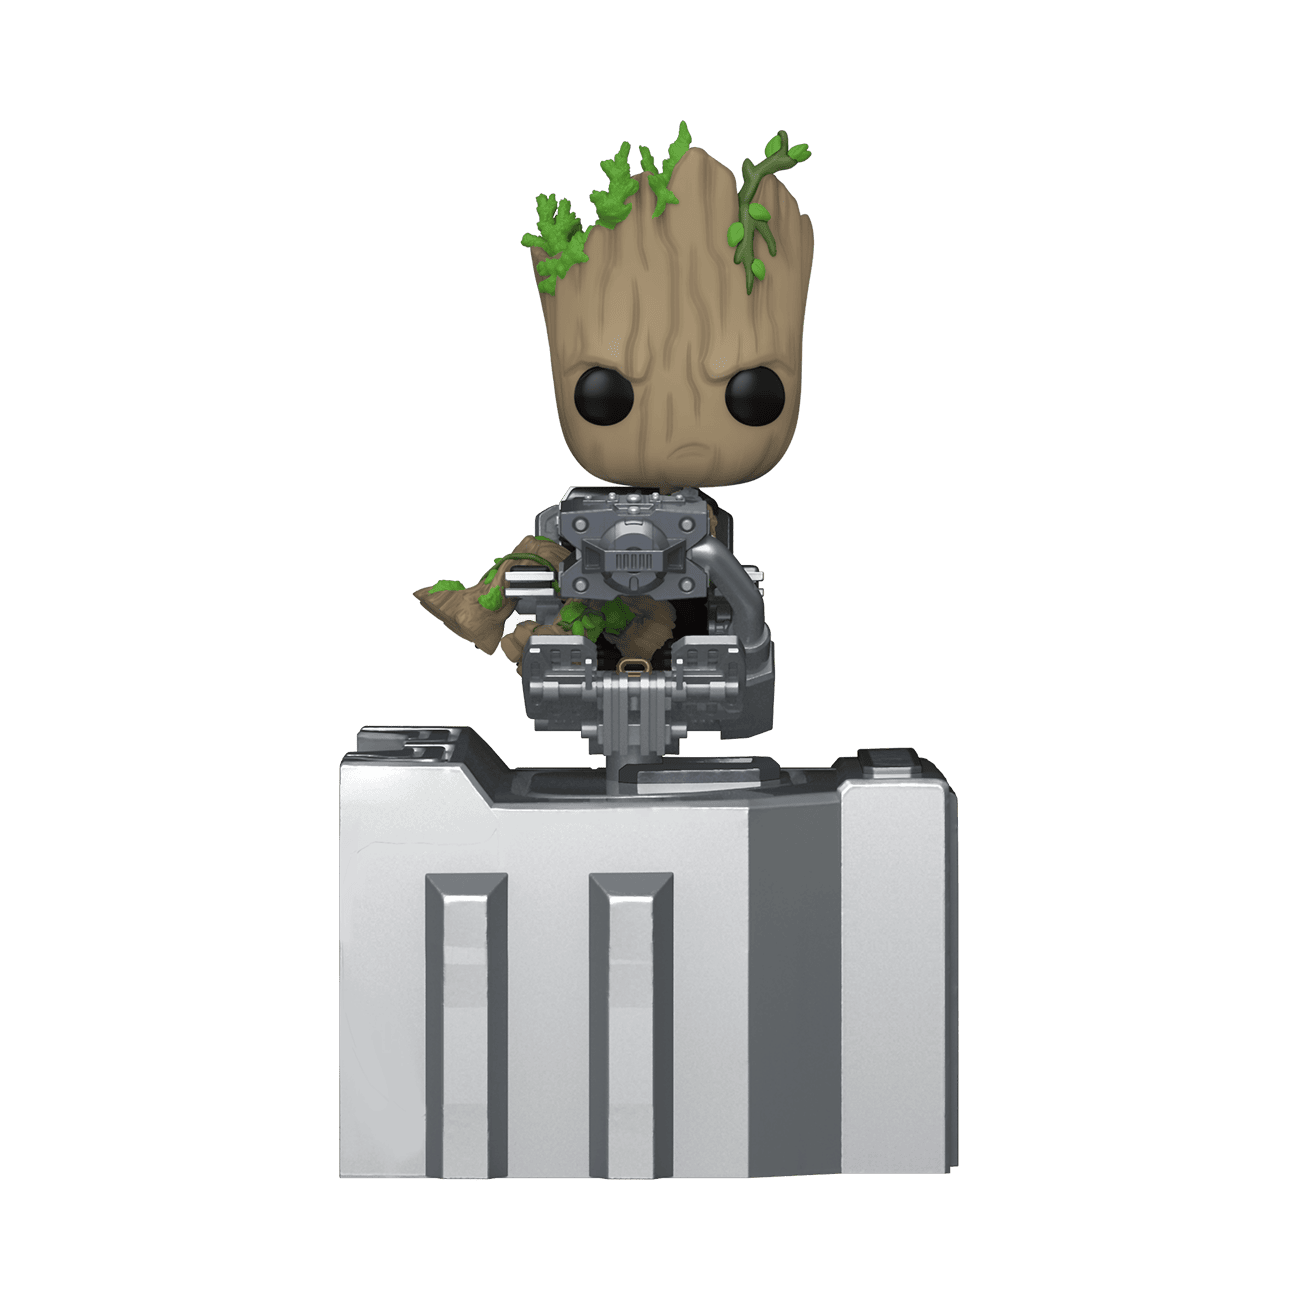 Marvel Funko Pop Guardians of the Galaxy Benatar Set Concludes With Groot